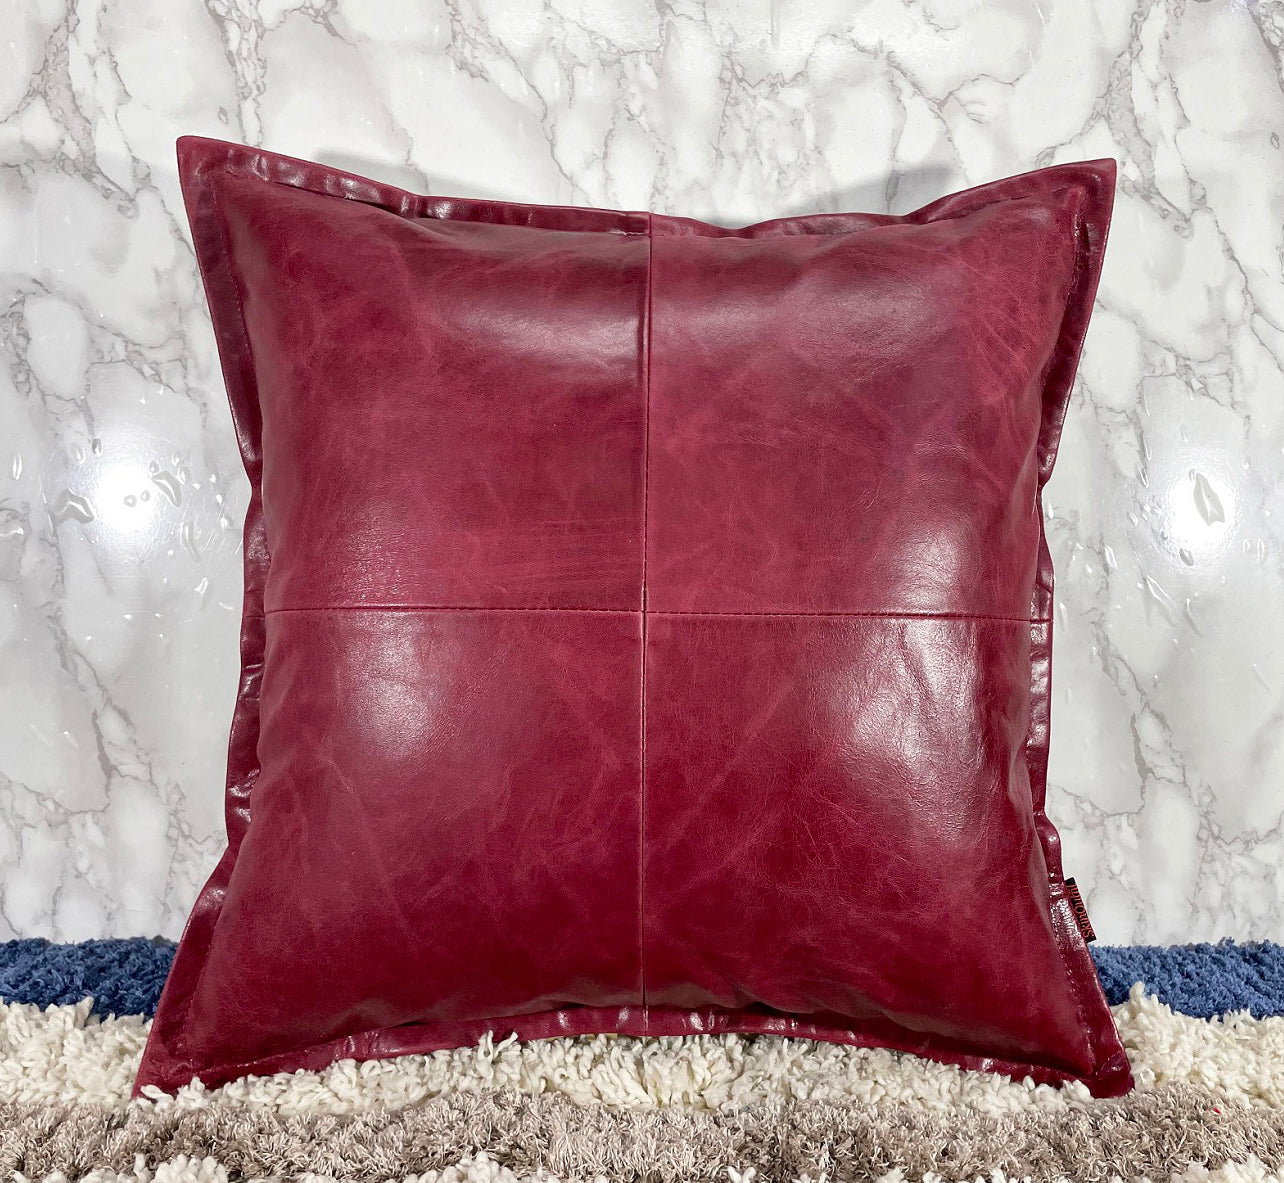 Genuine Leather Square Pillow Cover 14 SkinOutfit